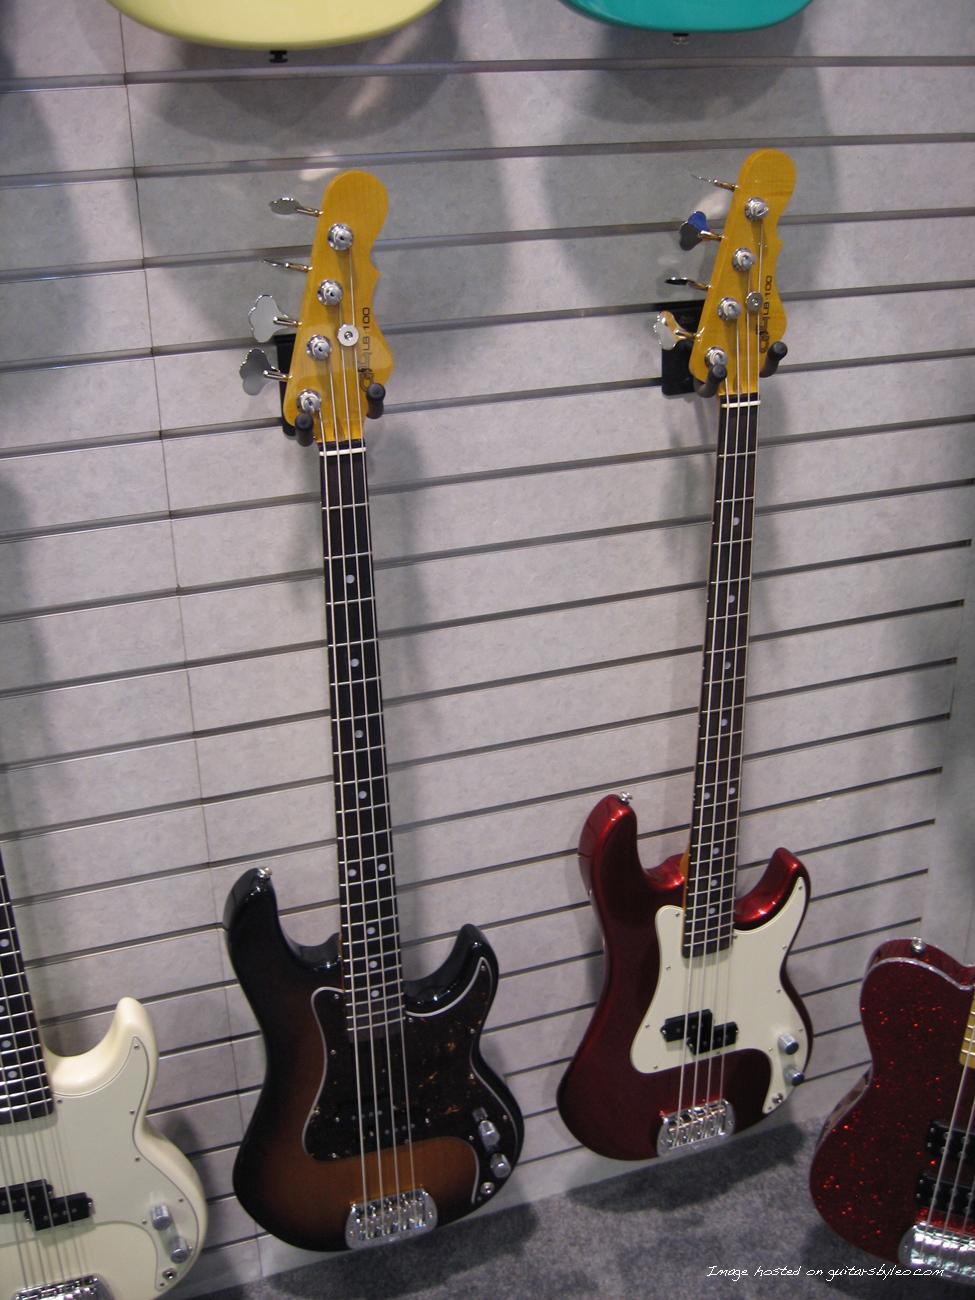 White, Tobacco Sunburst, and Candy Apple Red LB-100 models